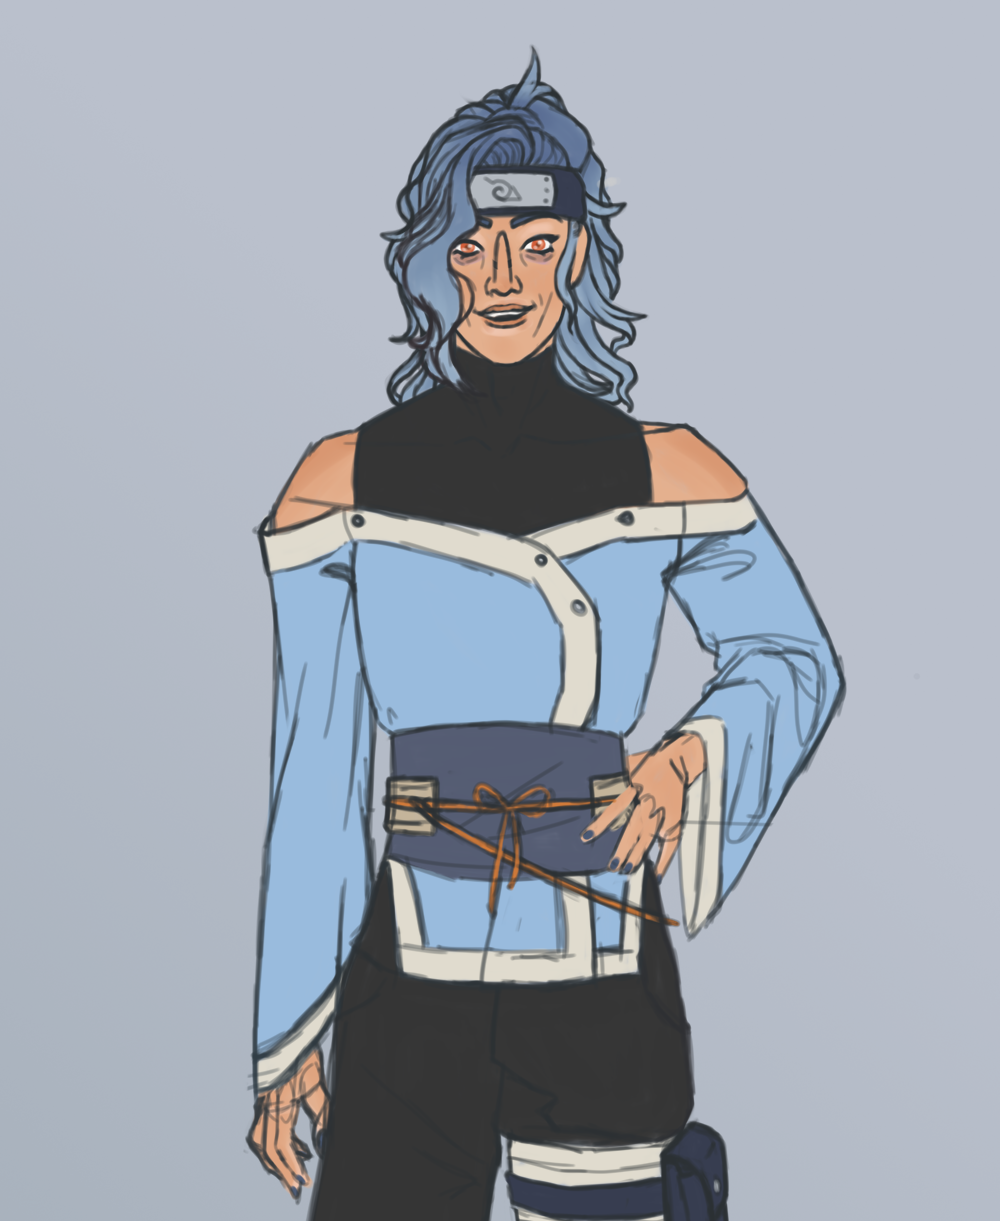 A digital sketch of a man with peach skin, wavy blue hair that is tied into a ponytail, and orange eyes. He is facing the viewer with a hand on one hip and has a joyful expression with an open-mouthed smile. He is wearing a black, sleeveless turtleneck and black trousers, a light blue kimono-style top and a darker blue waist band.  He is wearing a headband from Naruto with a Leaf Village symbol, and the leg wrappings and blue thigh satchel common to Naruto characters.